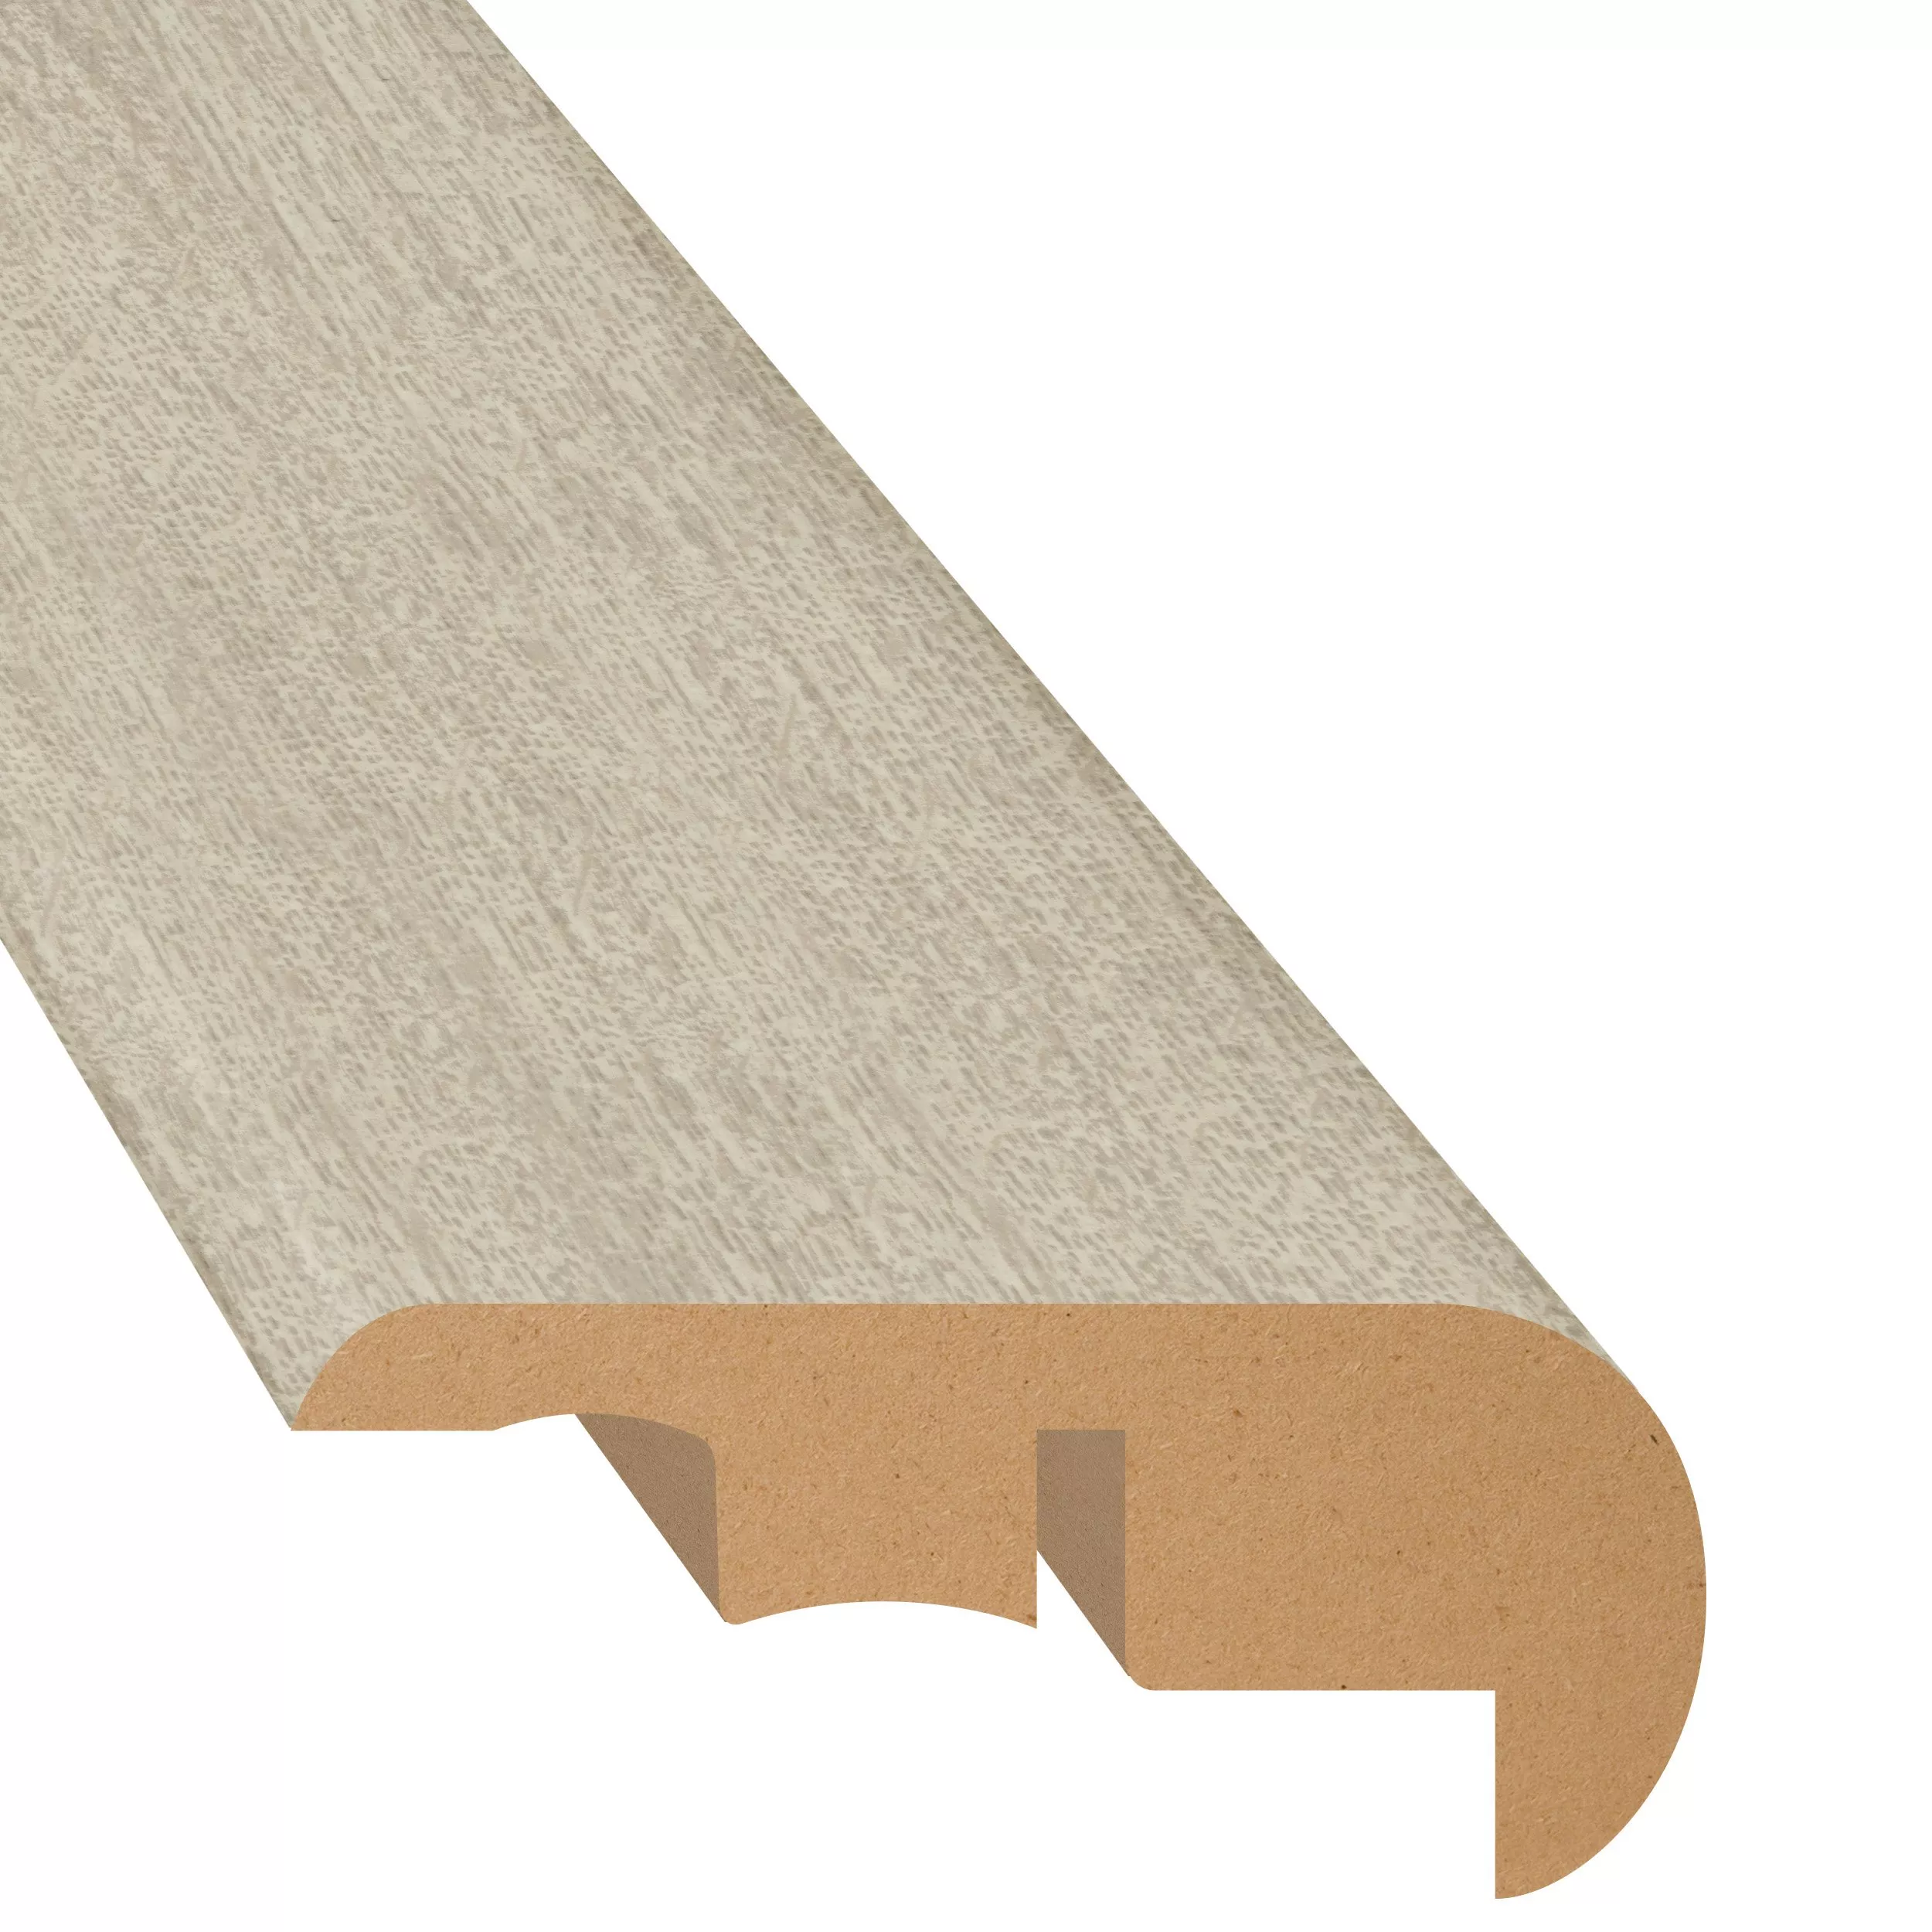 East Bay Breeze 94in. Laminate Overlapping Stair Nose